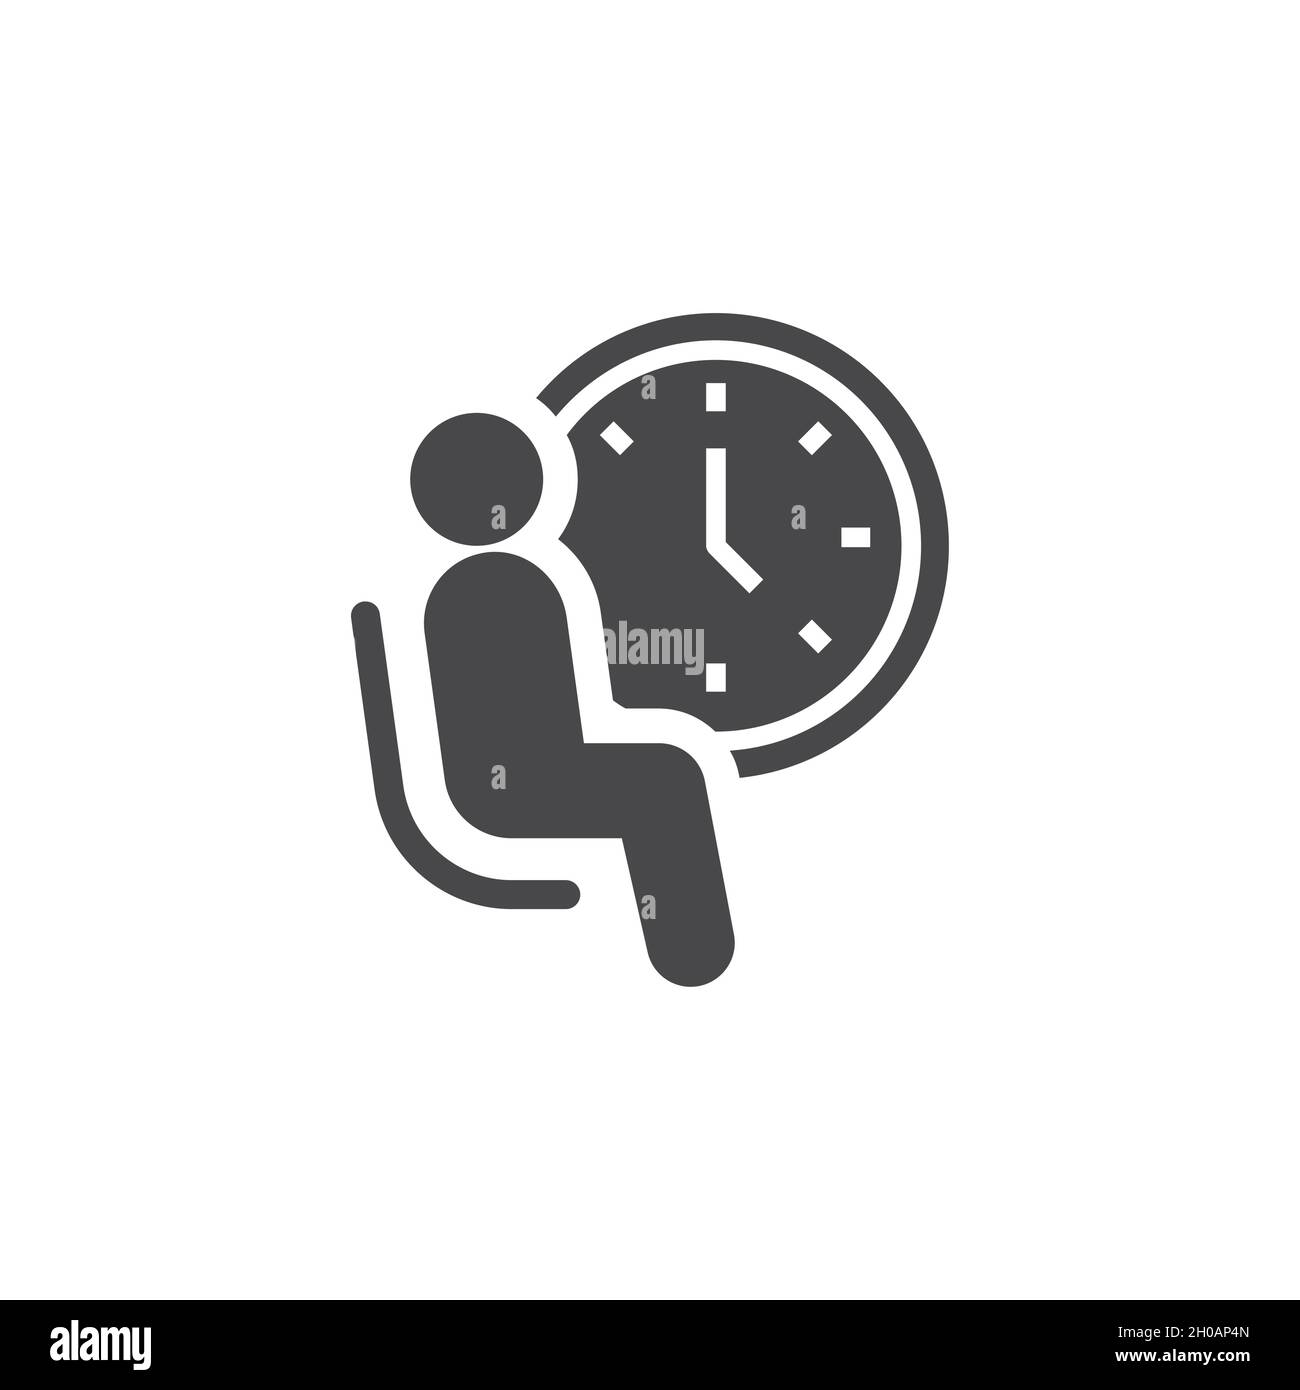 Waiting room black vector icon. Person waiting in chair and clock symbol. Stock Vector